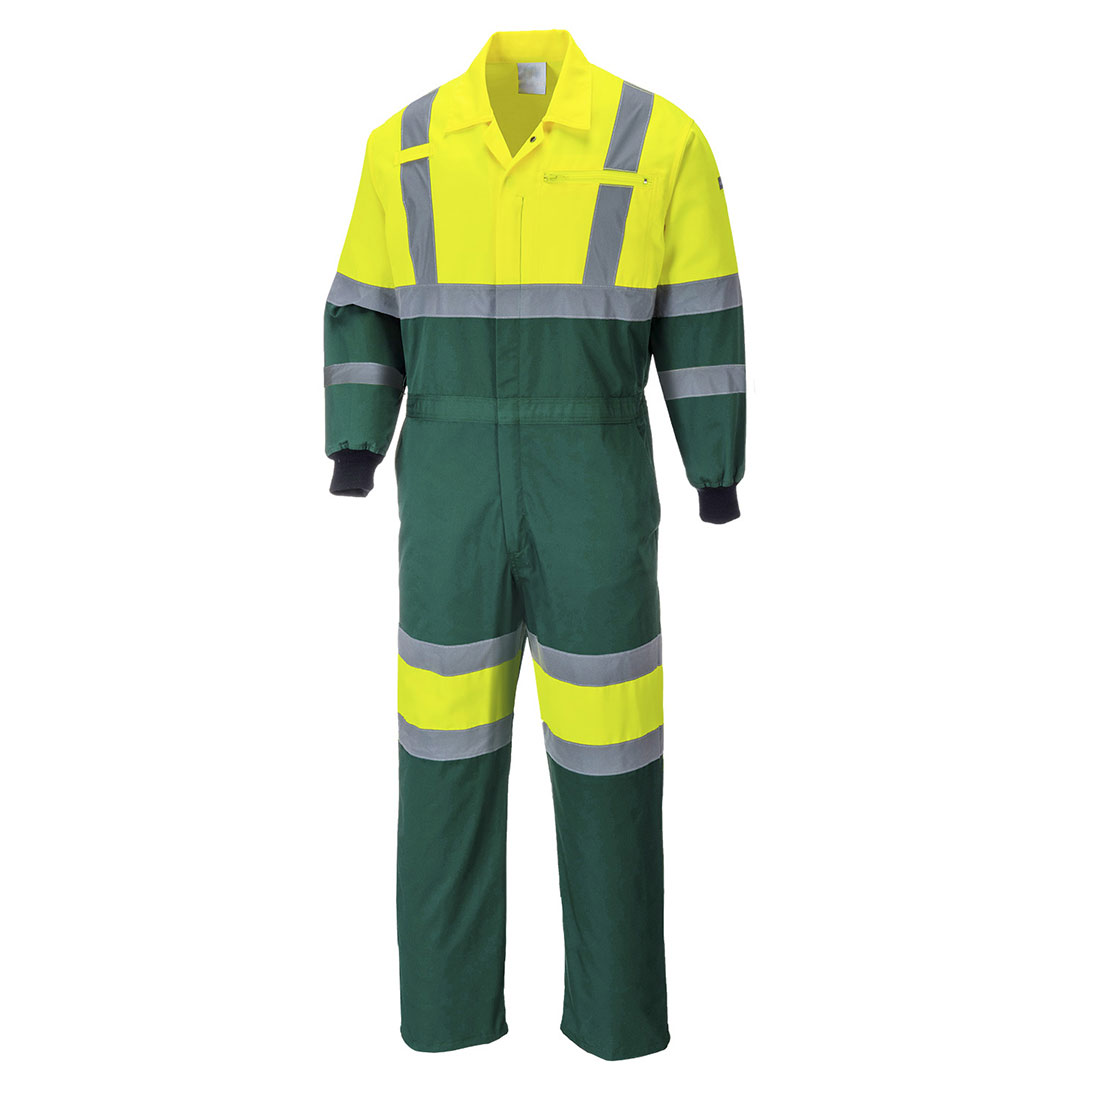 Hi-Vis "X" Back Coverall with Two-Way Zip for Quick and Easy Access